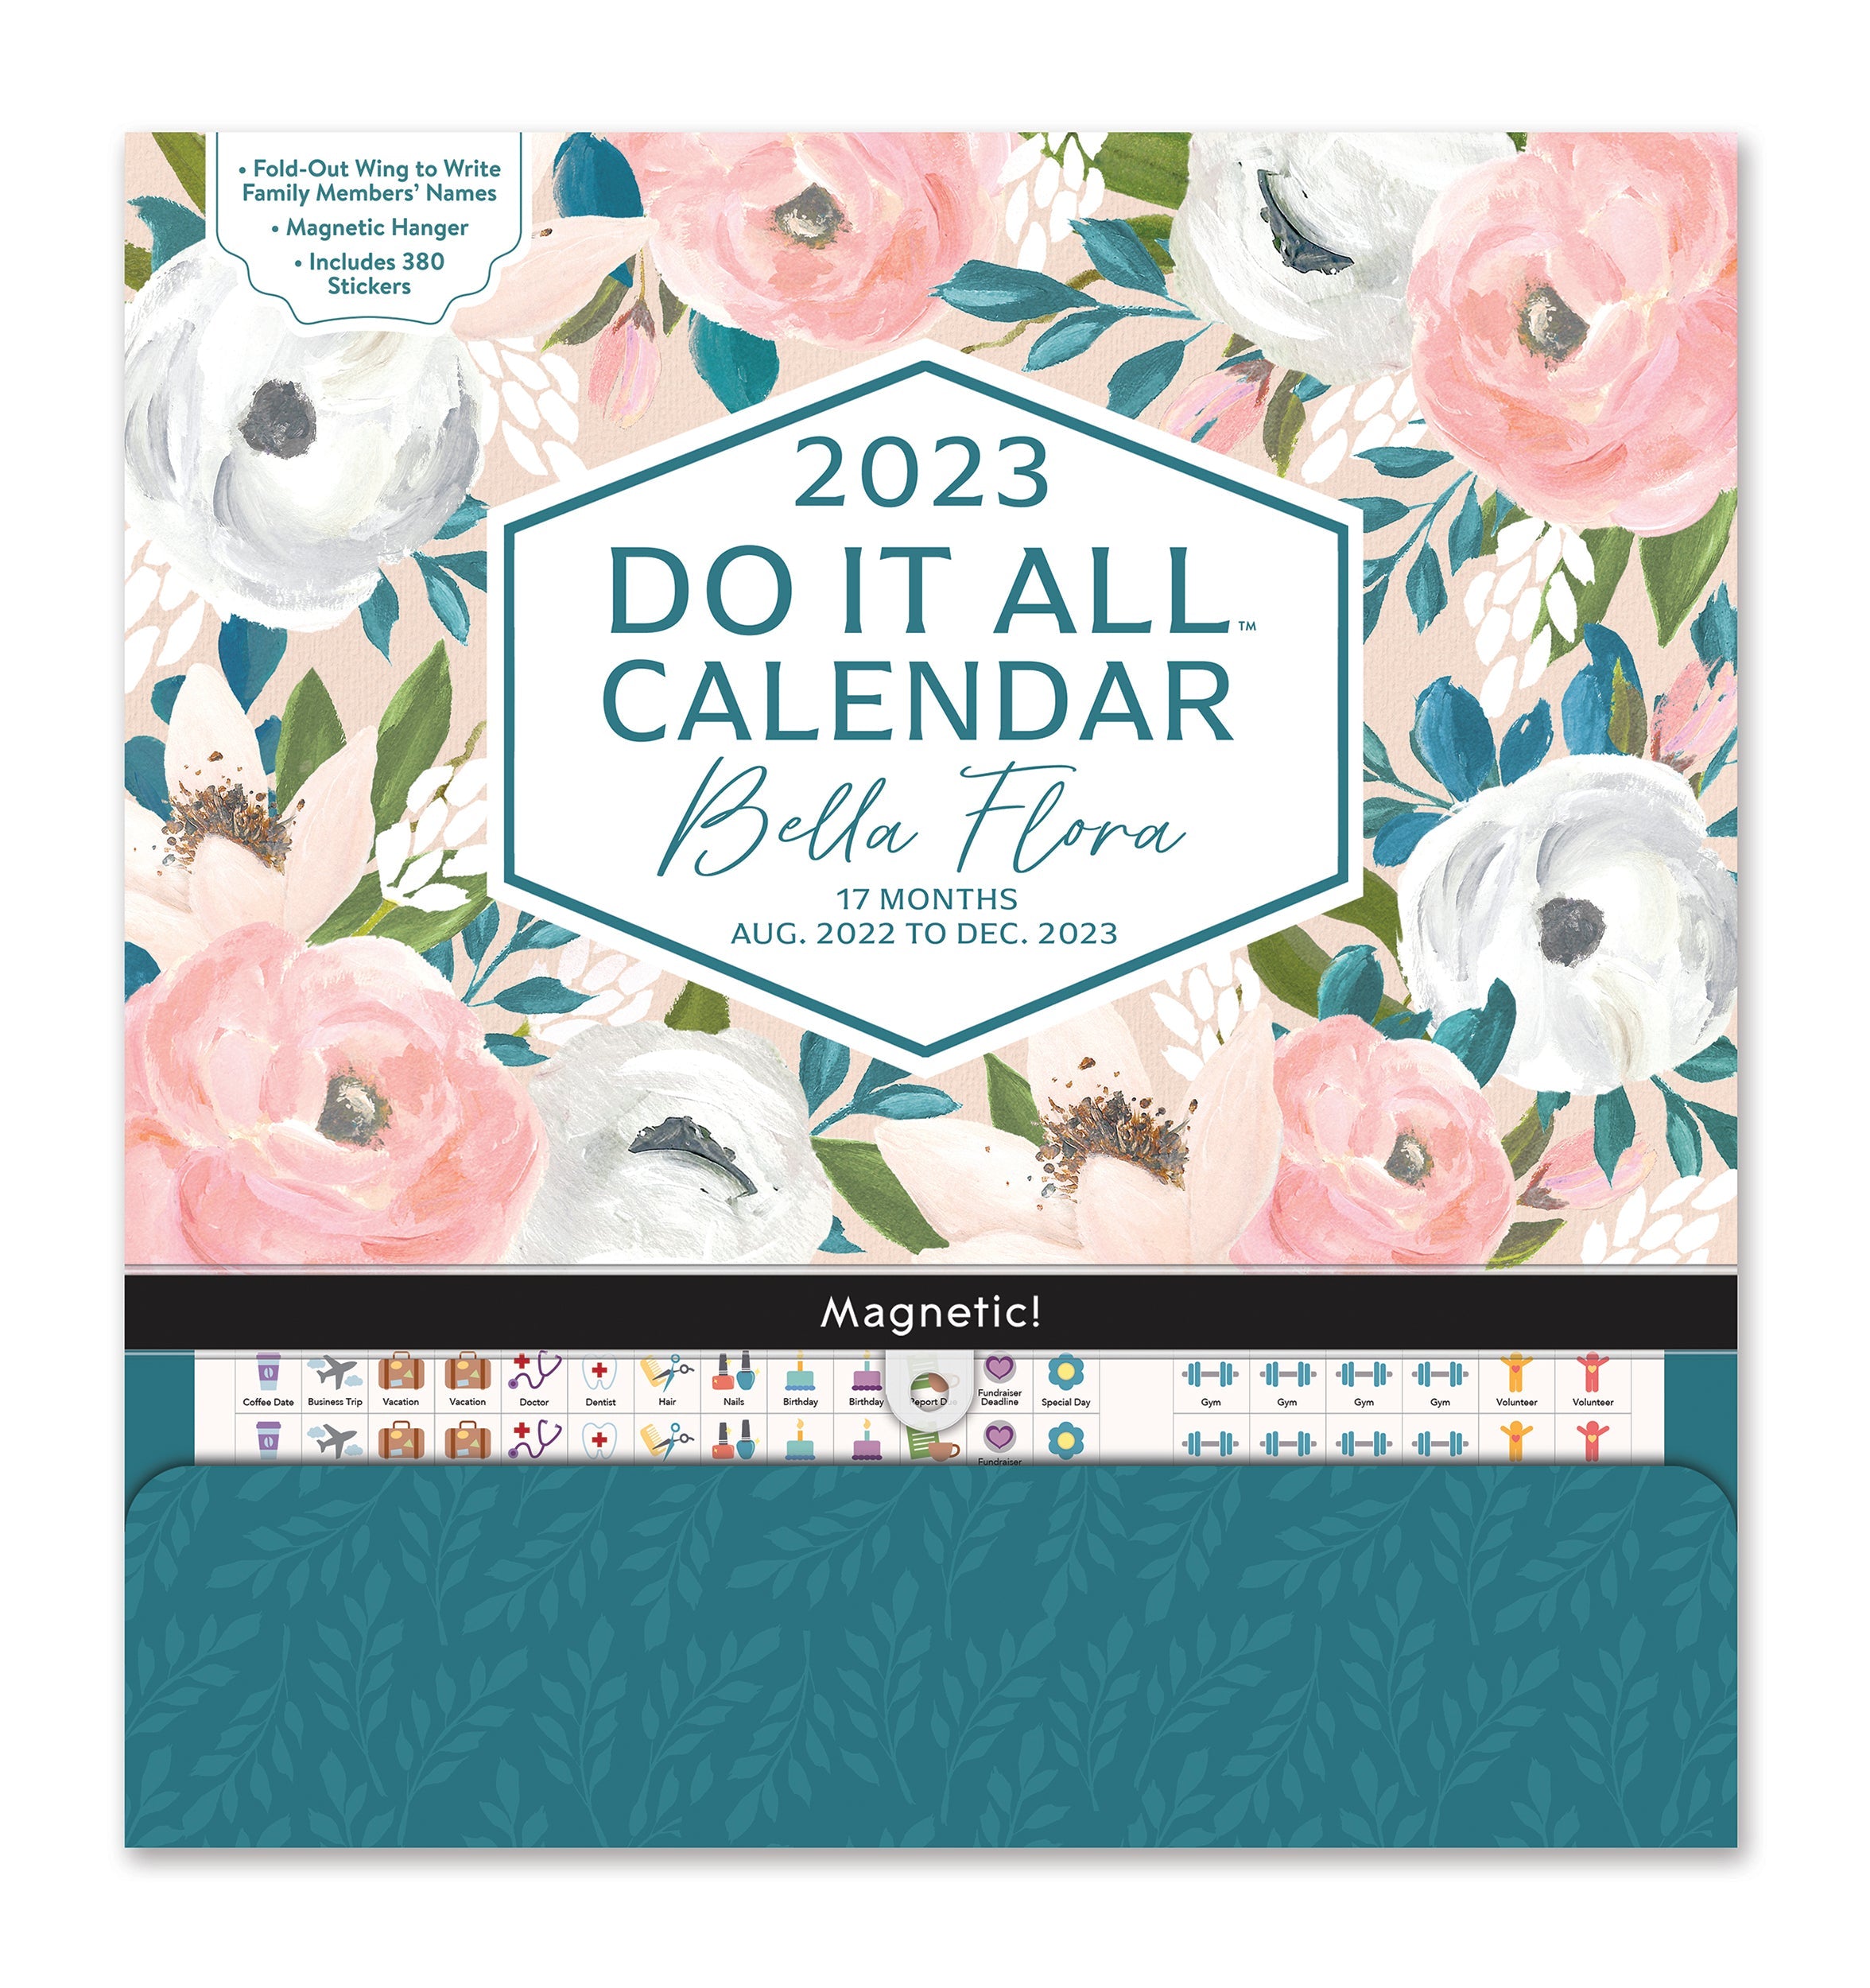 2023 Bella Flora (Do It All Family Planner) - Magnetic Deluxe Wall Calendar